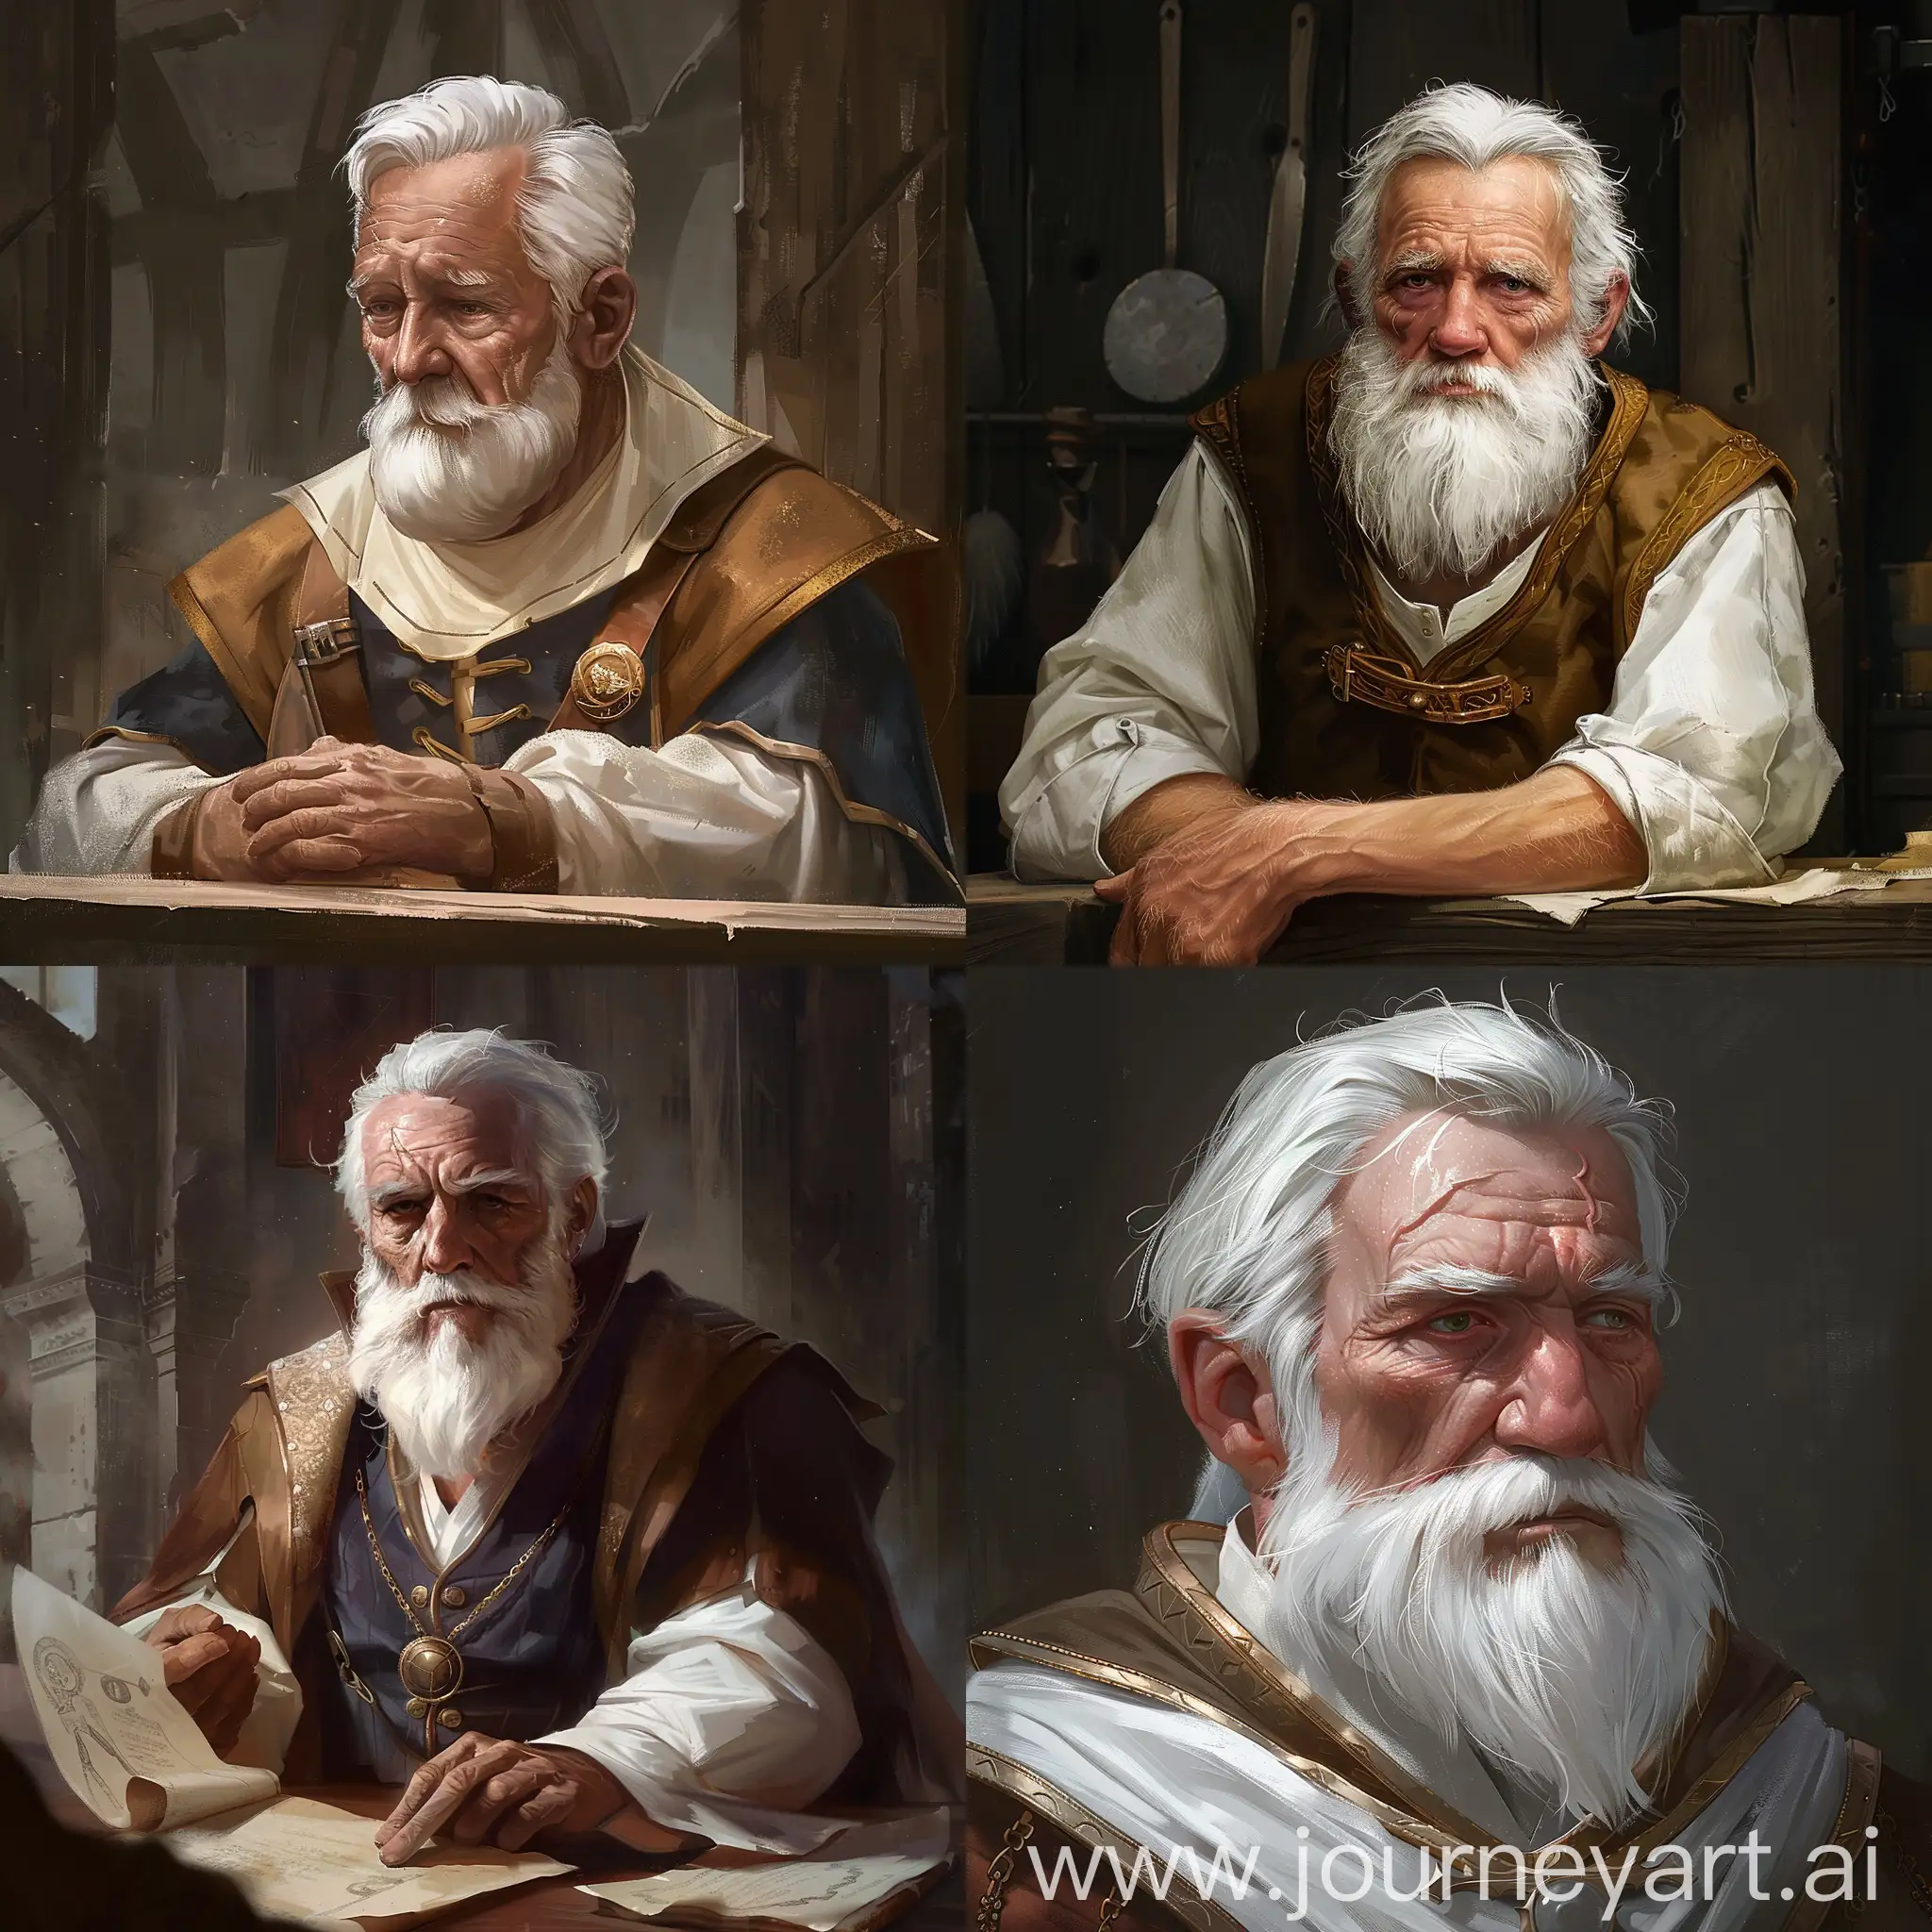 Elderly-Fantasy-Mayor-with-White-Hair-and-Beard-Crafting-in-Humble-Serenity